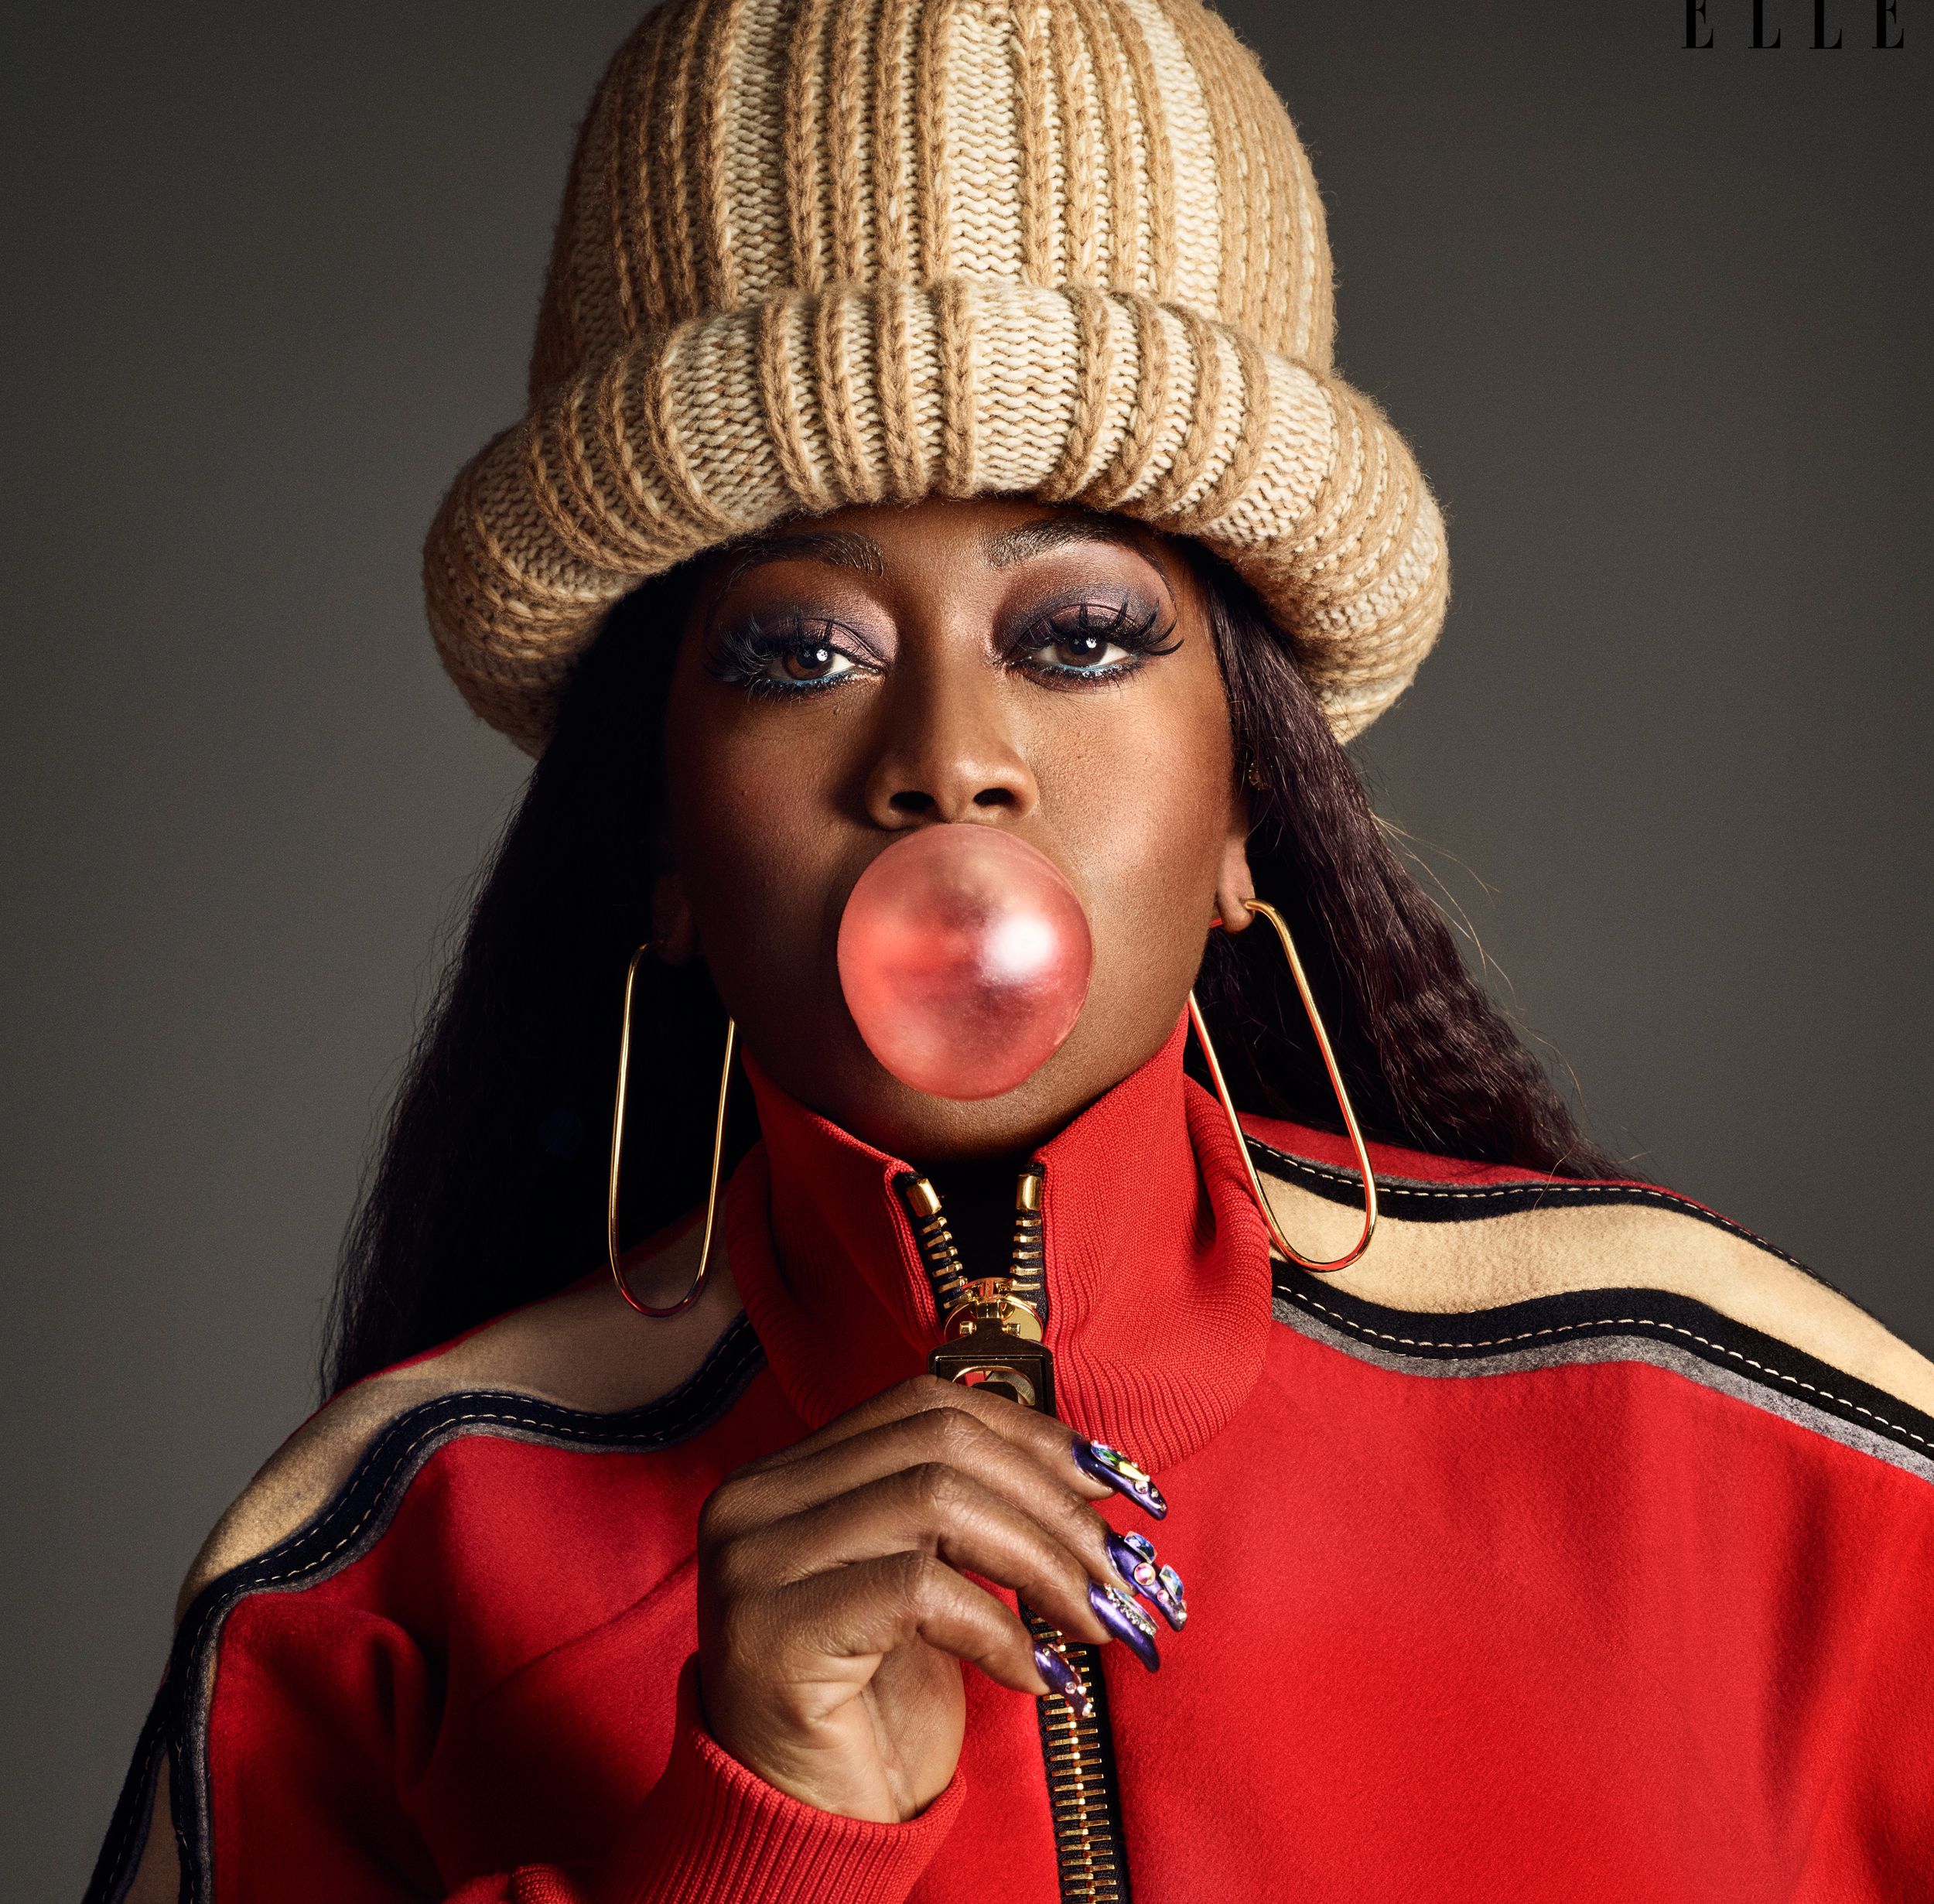 Missy making love videos How Missy Elliott Became An Icon Miss Elliot Interview And Elle Cover Story